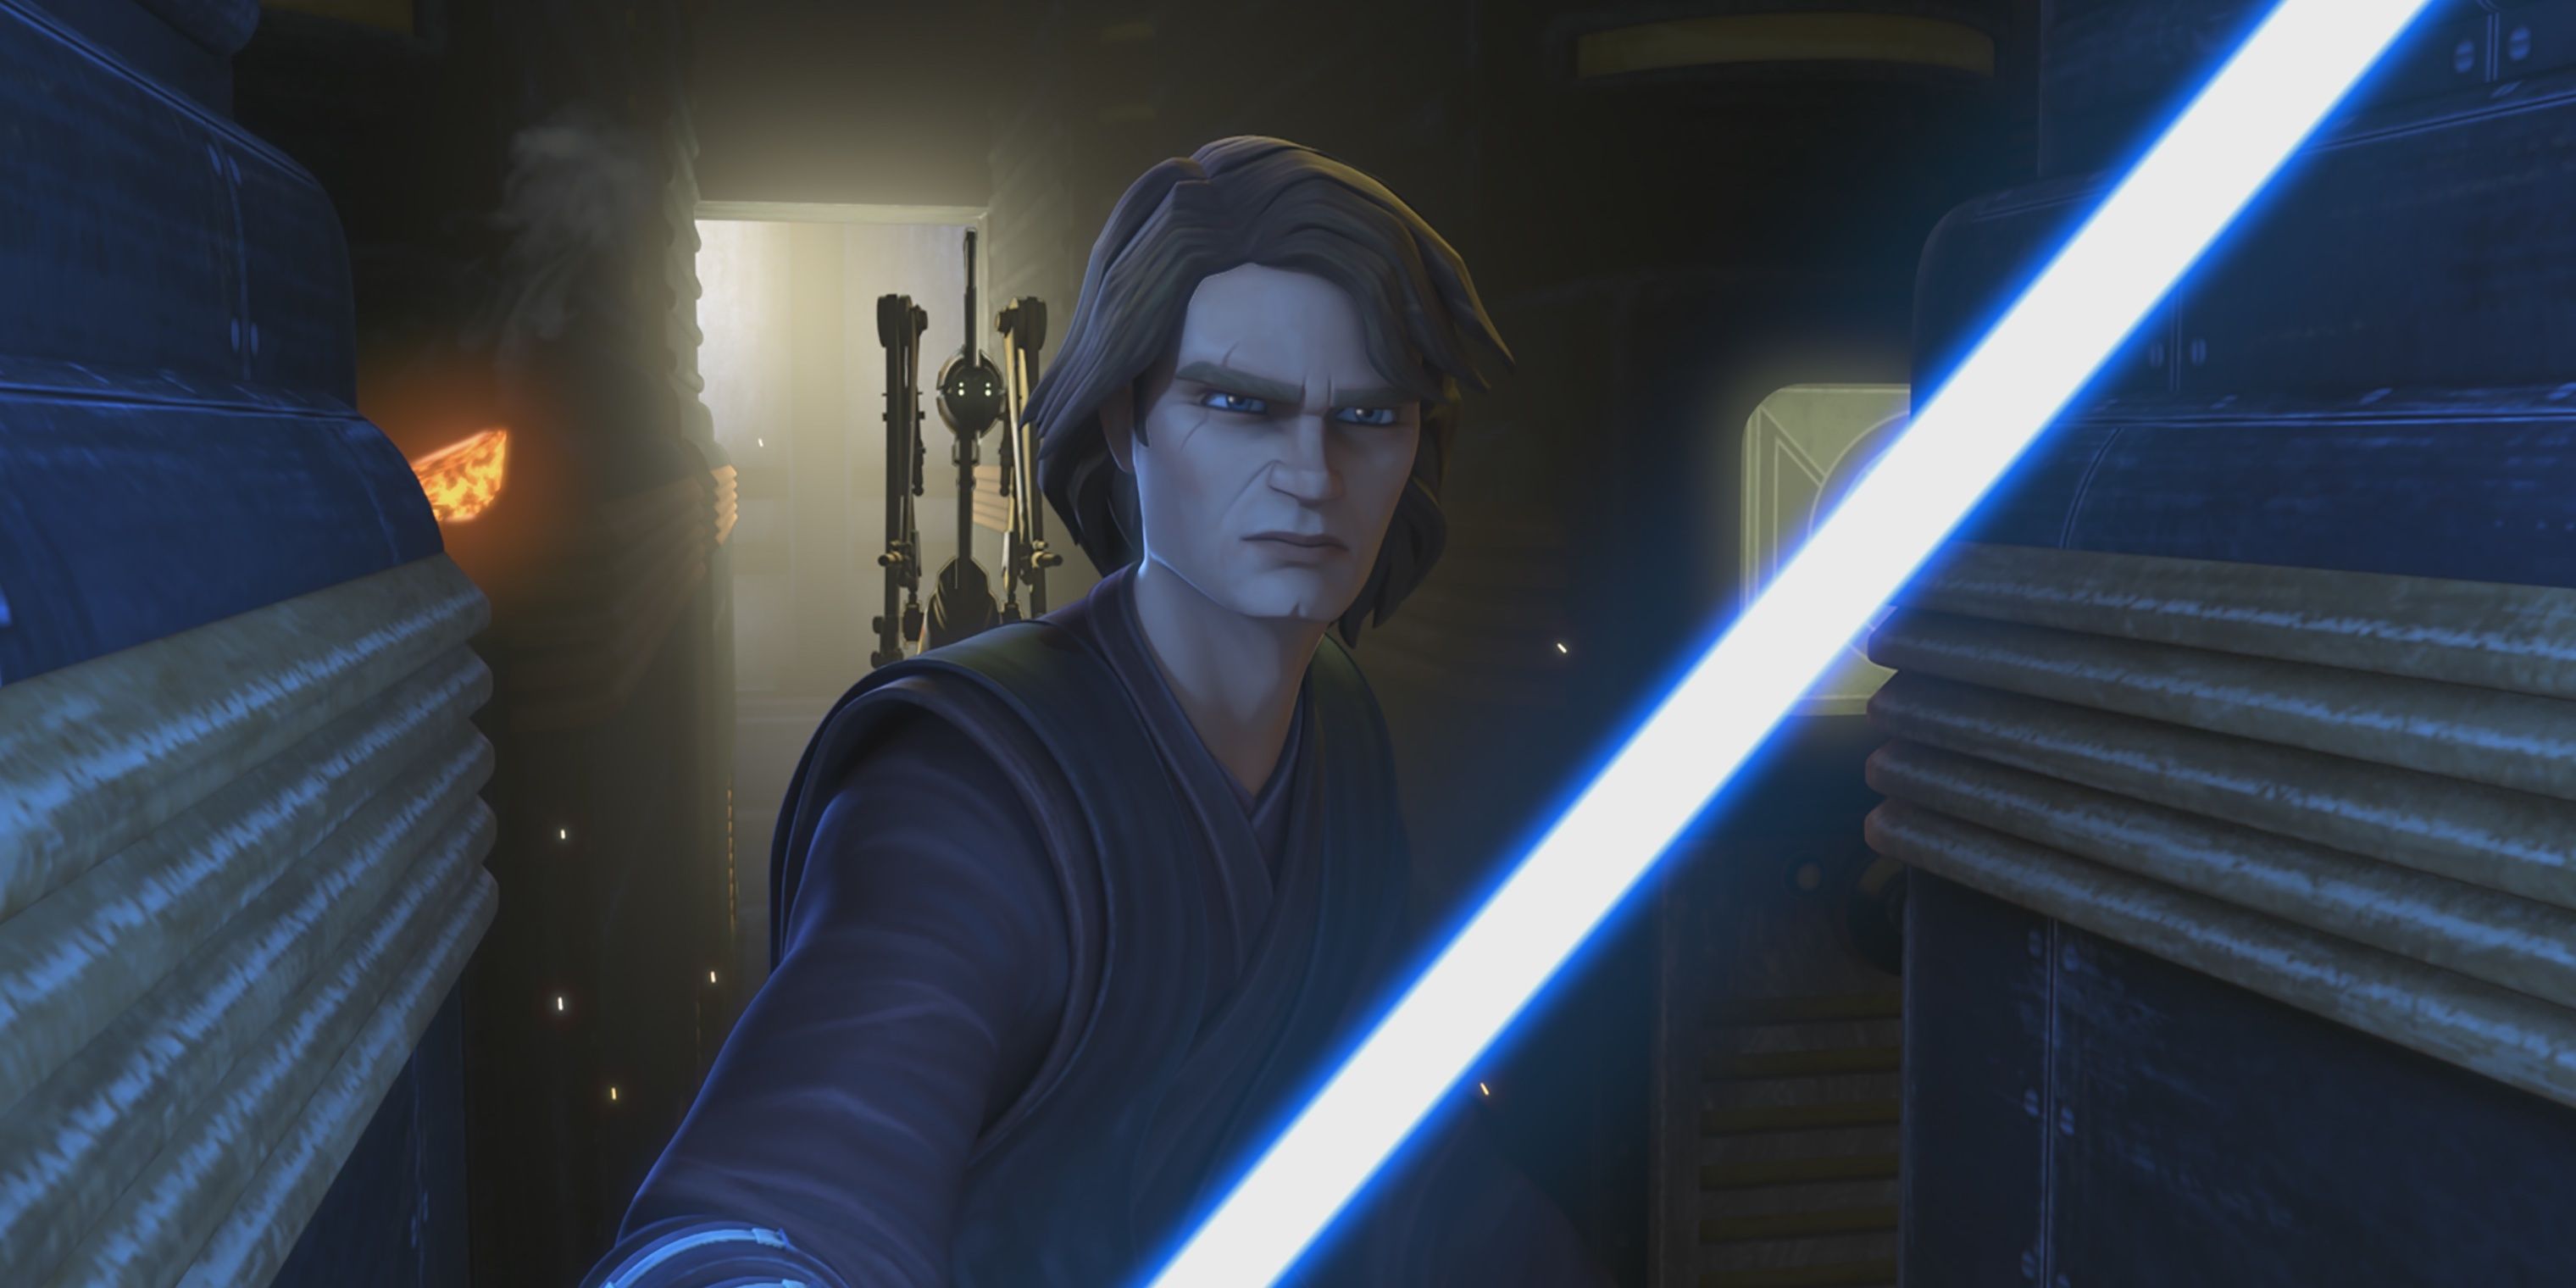 Anakin with his lightsaber drawn on Admiral Trench in Star Wars: The Clone Wars